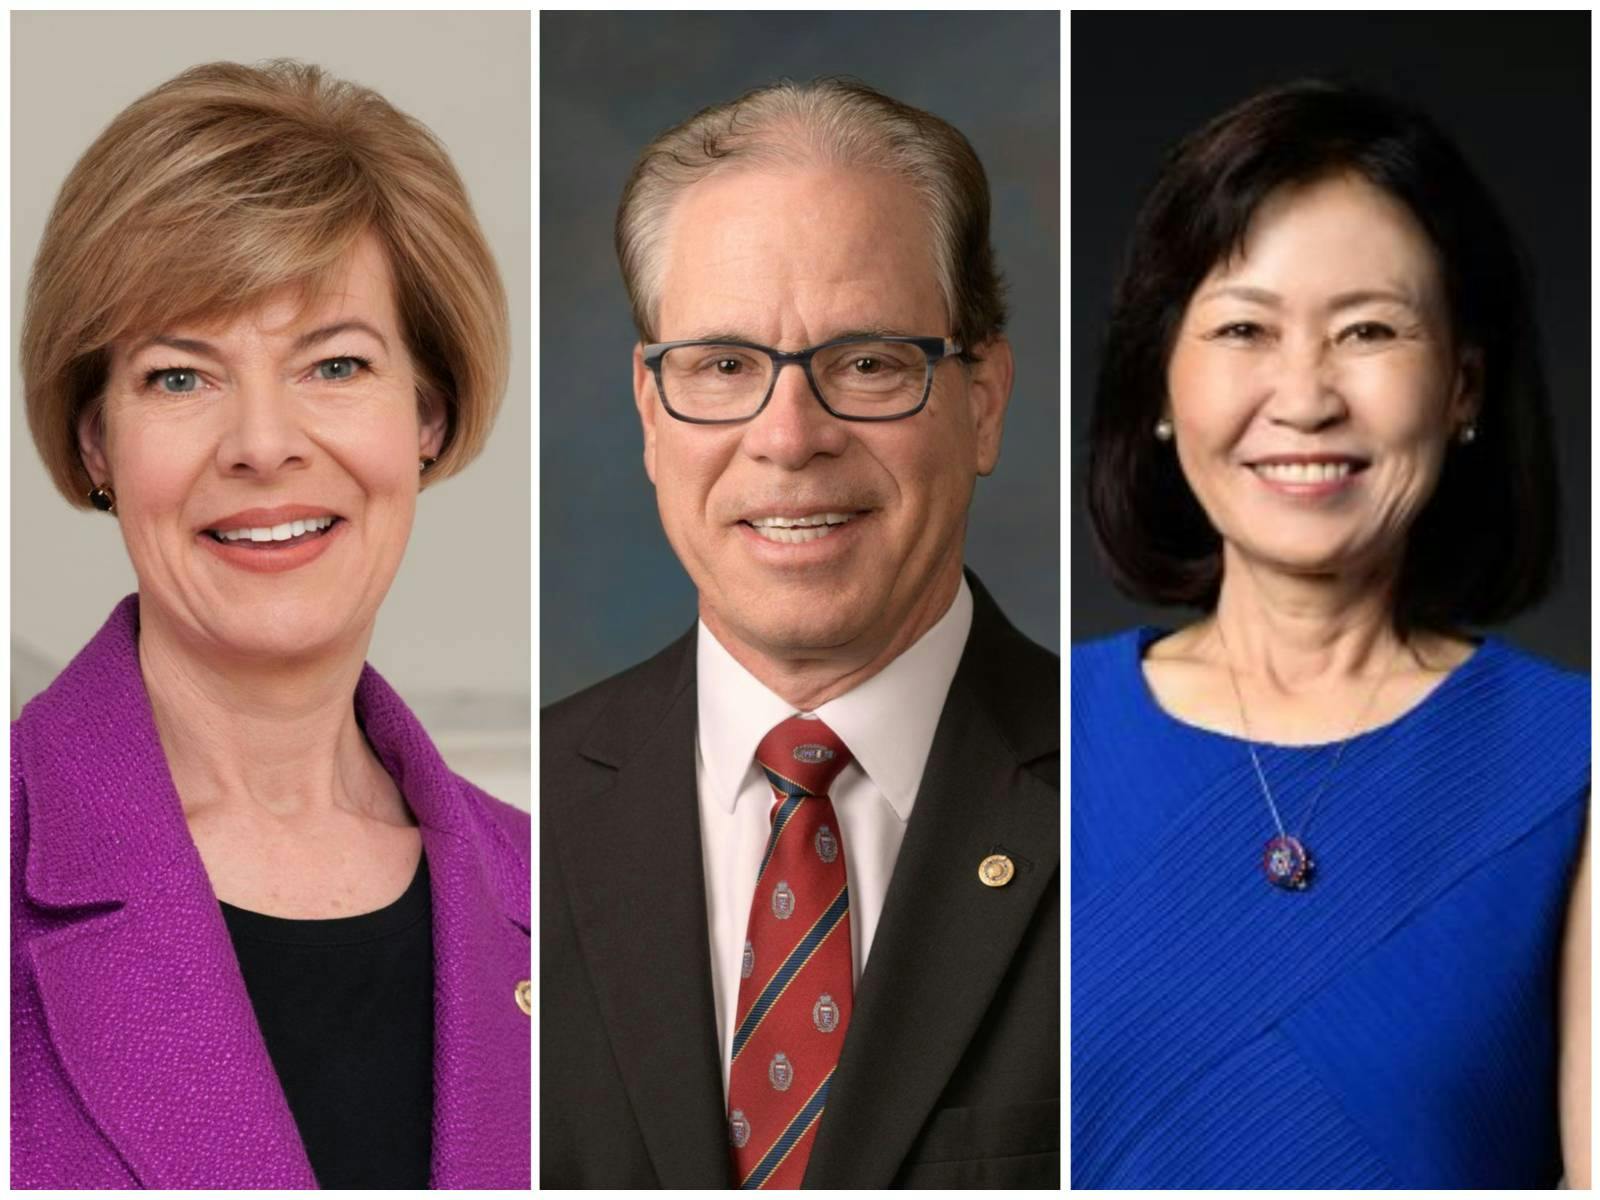 From left, U.S. Sens. Tammy Baldwin and Mike Braun and U.S. Rep. Michelle Steel (Photos from Senate and House offices)